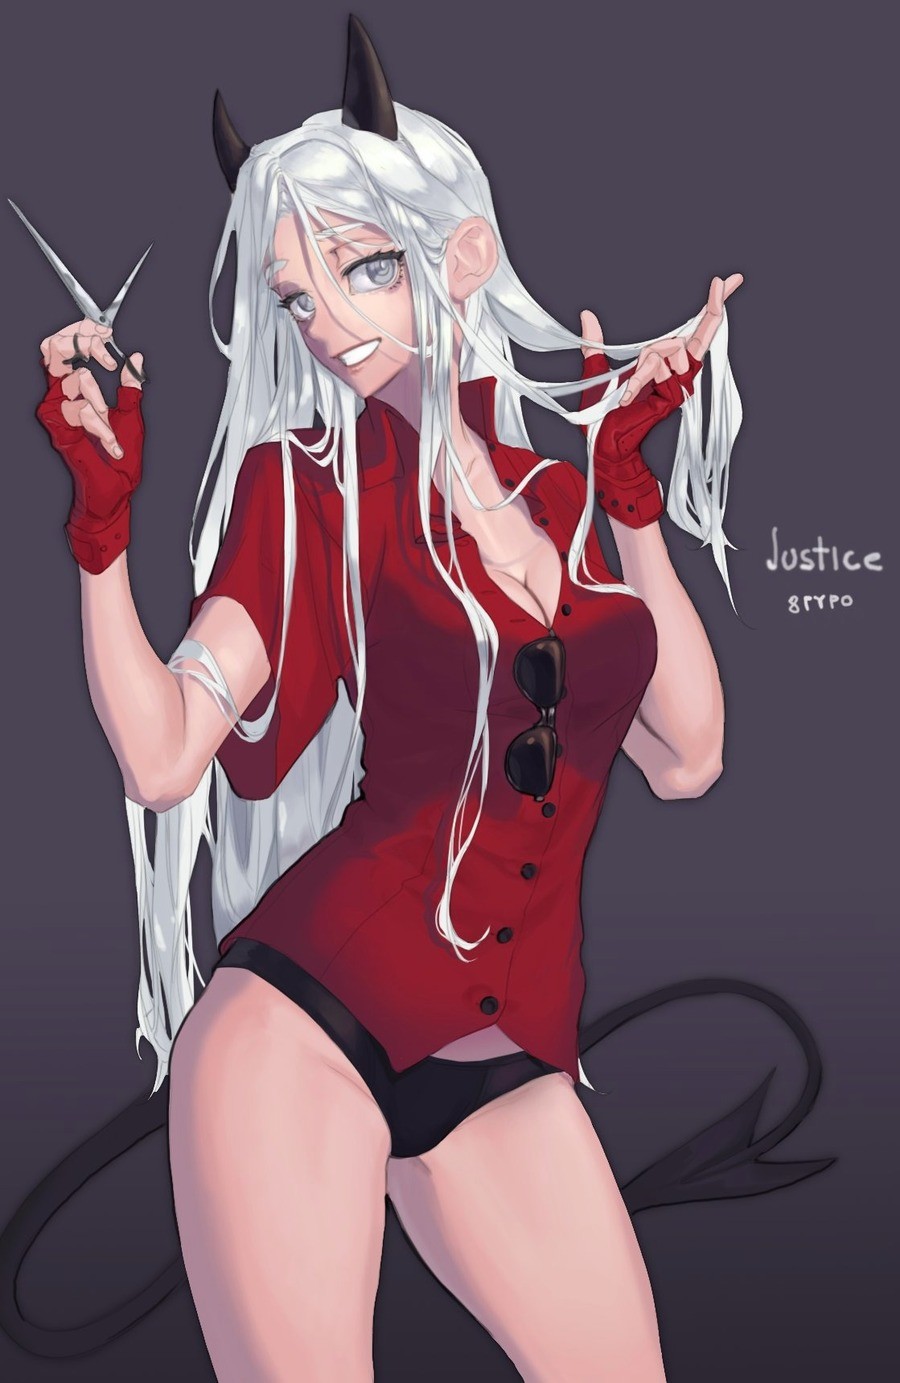 Daily Demon Harem 303: Justice!. Hope you all had an AWESOME day today! Source: join list: DailyDemonHarem (191 subs)Mention Clicks: 38148Msgs Sent: 50296Mentio